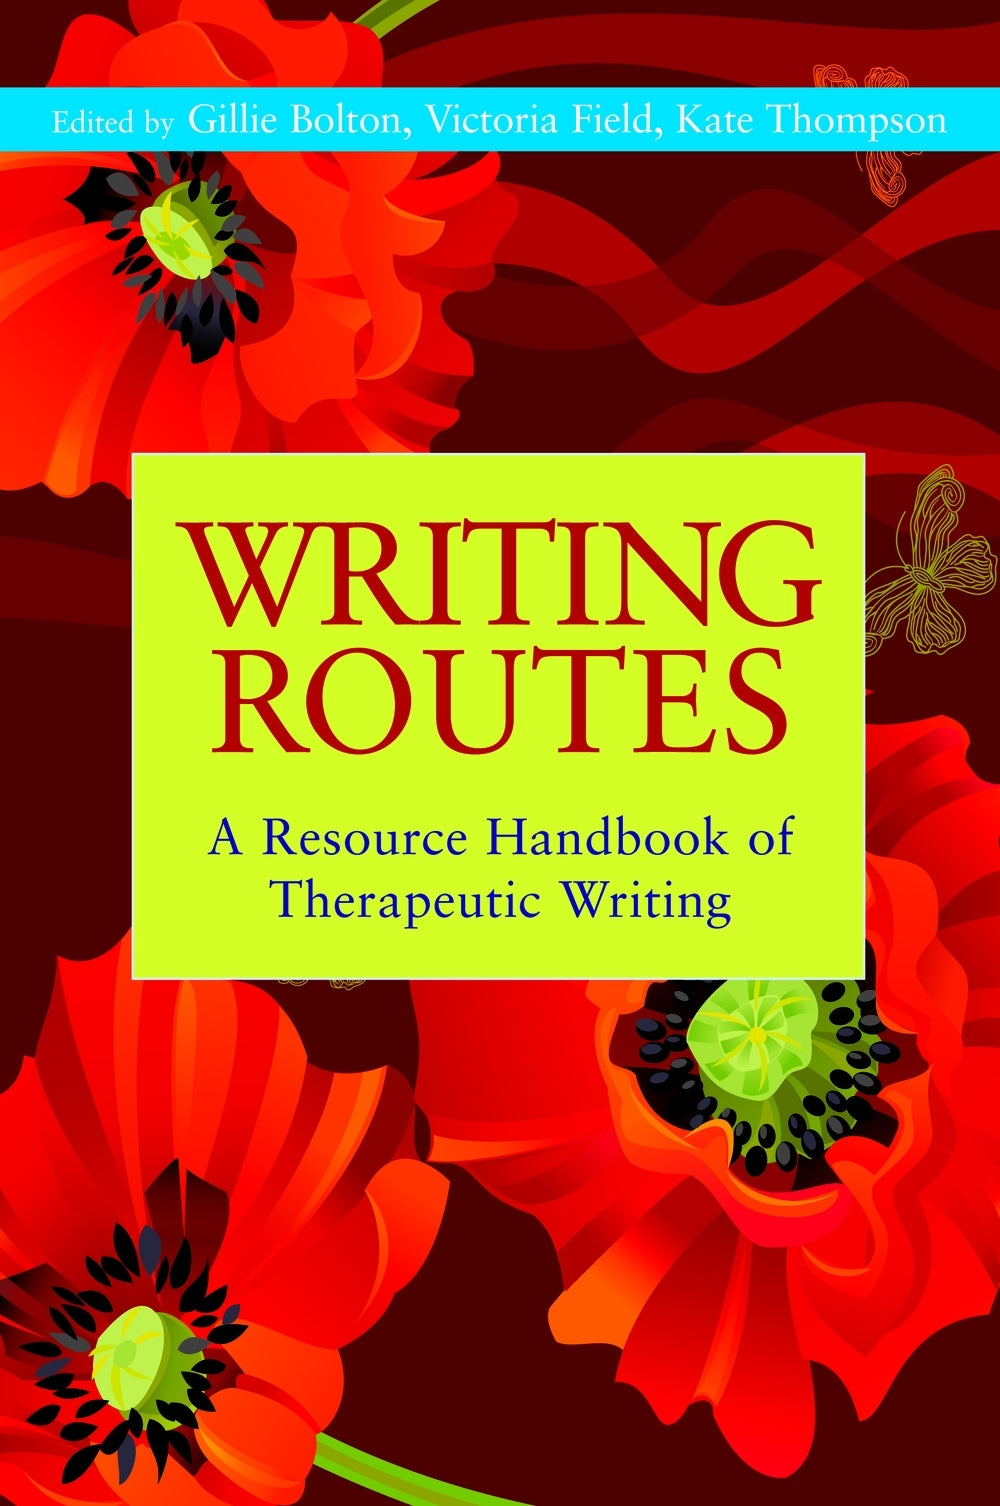 Writing Routes by Gillie Bolton, Kate Thompson, Victoria Field, Gwyneth Lewis, No Author Listed